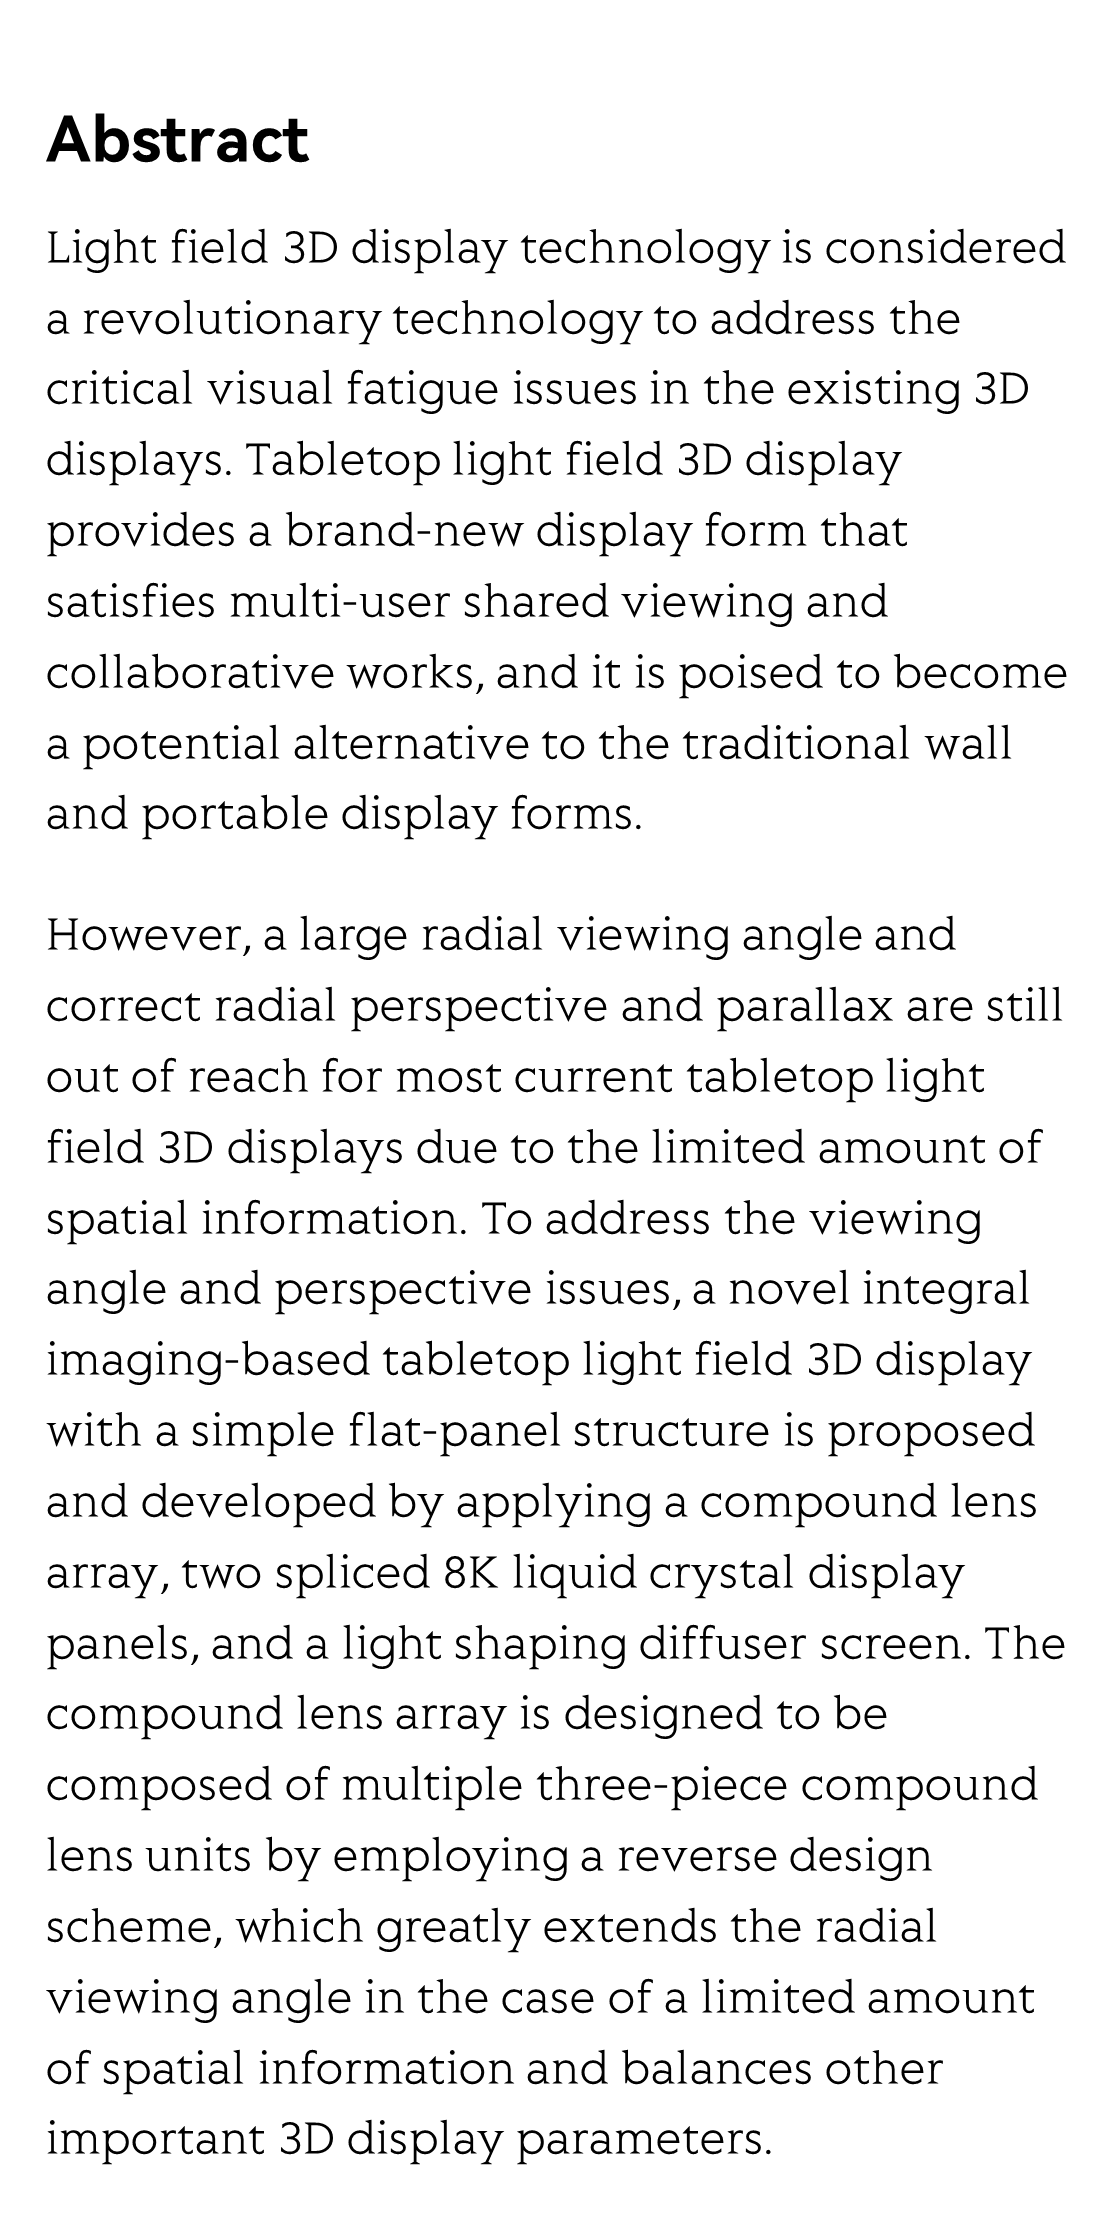 Integral imaging-based tabletop light field 3D display with large viewing angle_2